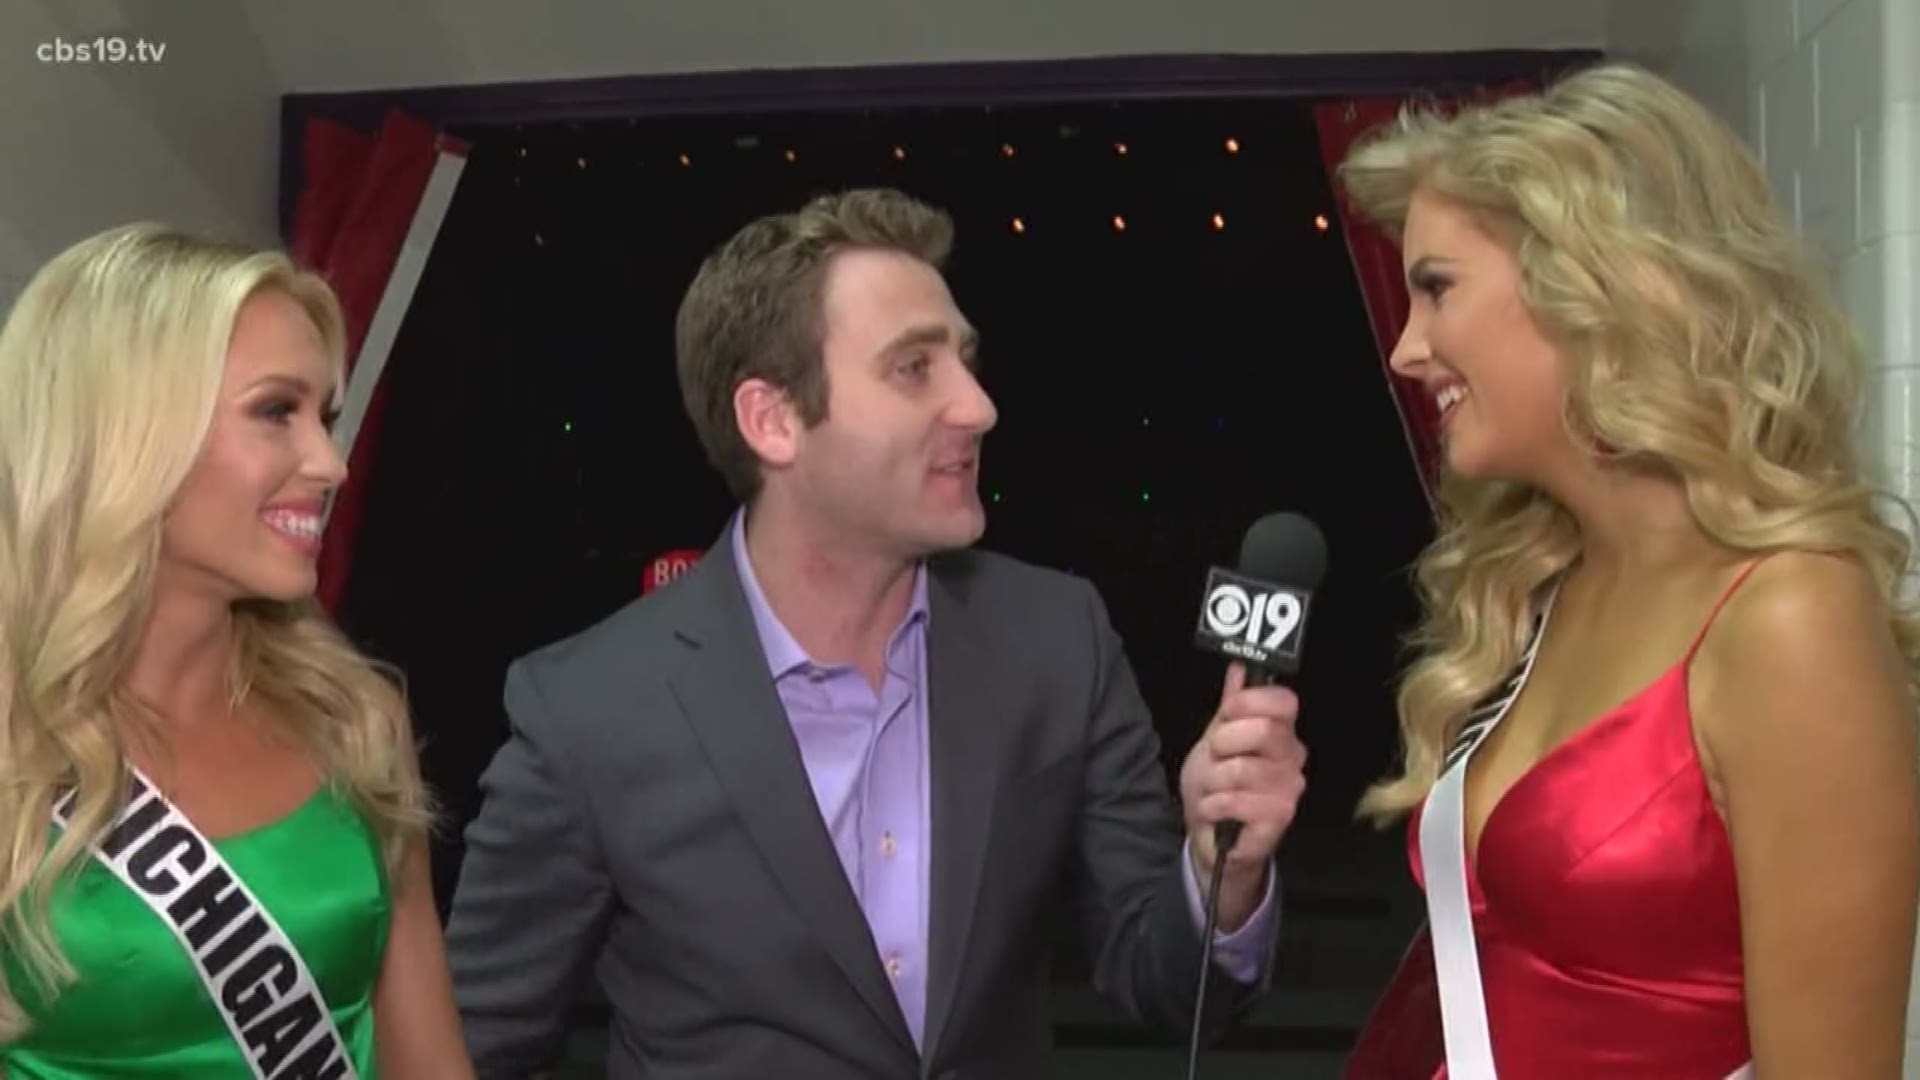 Backstage at Miss USA in Shreveport, Mike chats with contestants, Miss Michigan USA and Miss Ohio USA.